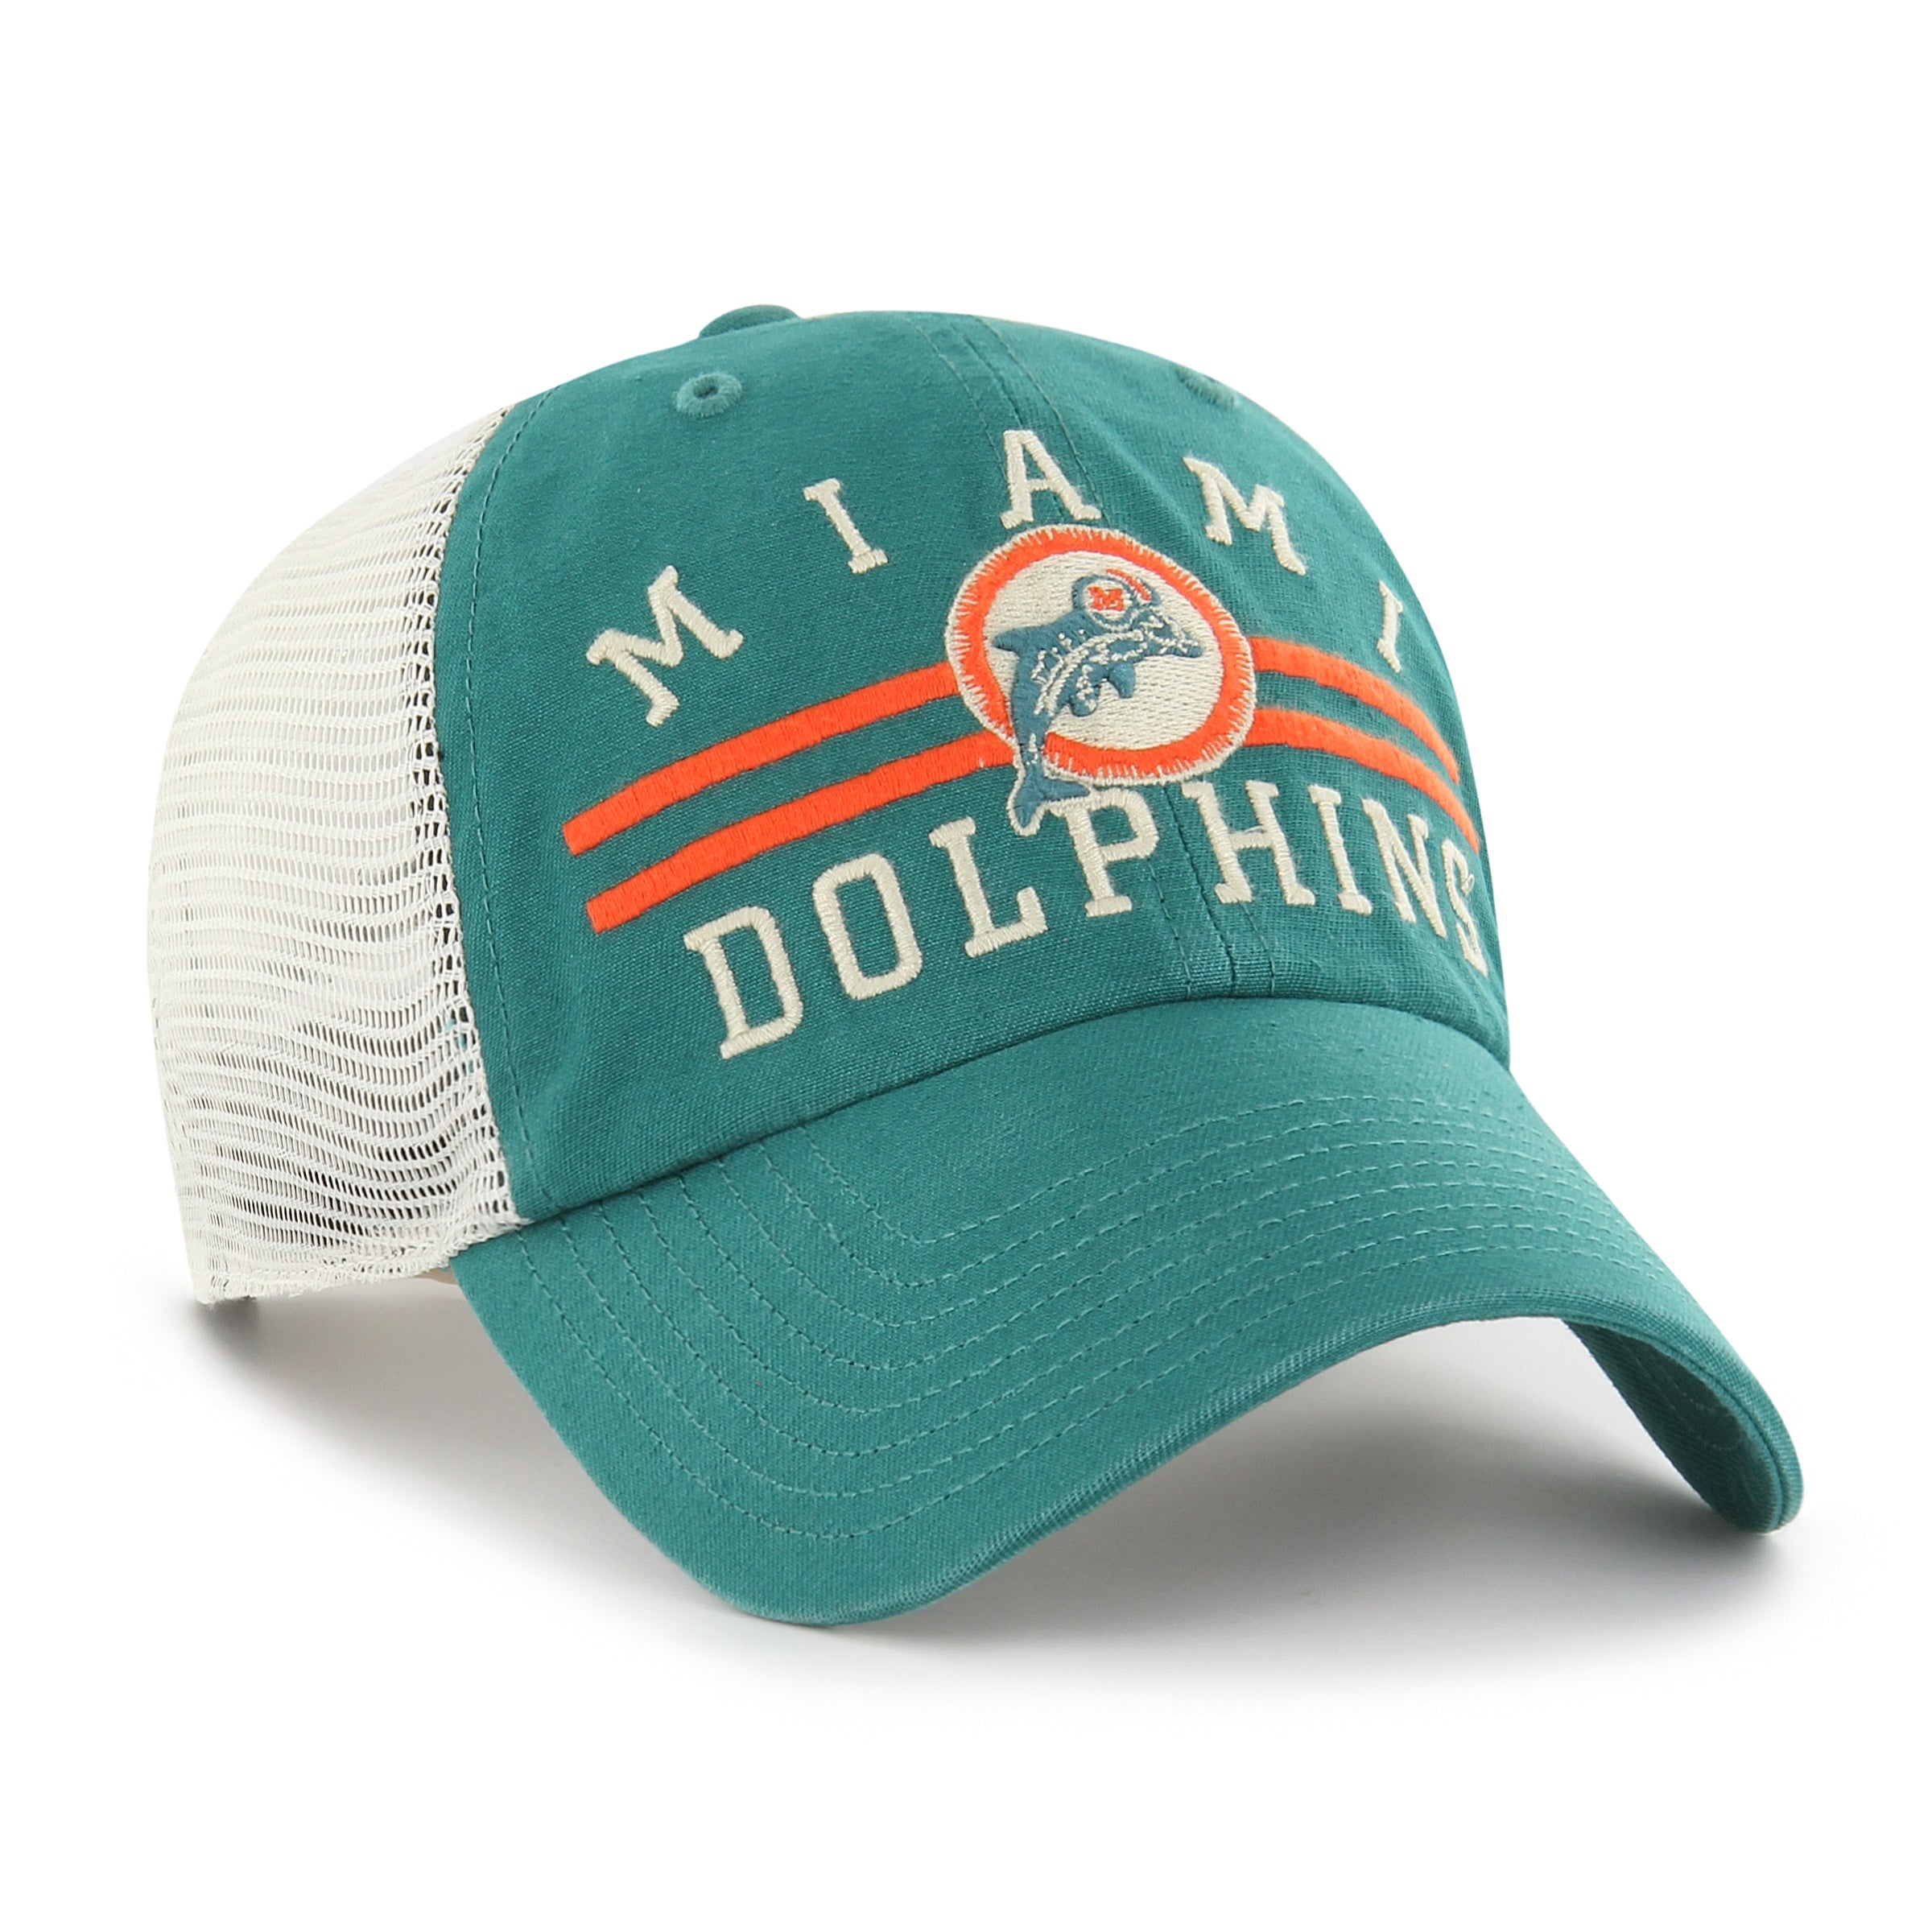 Miami Hat Dolphins Legacy Teal Up Clean Tailgate Adjustable 47 Brand